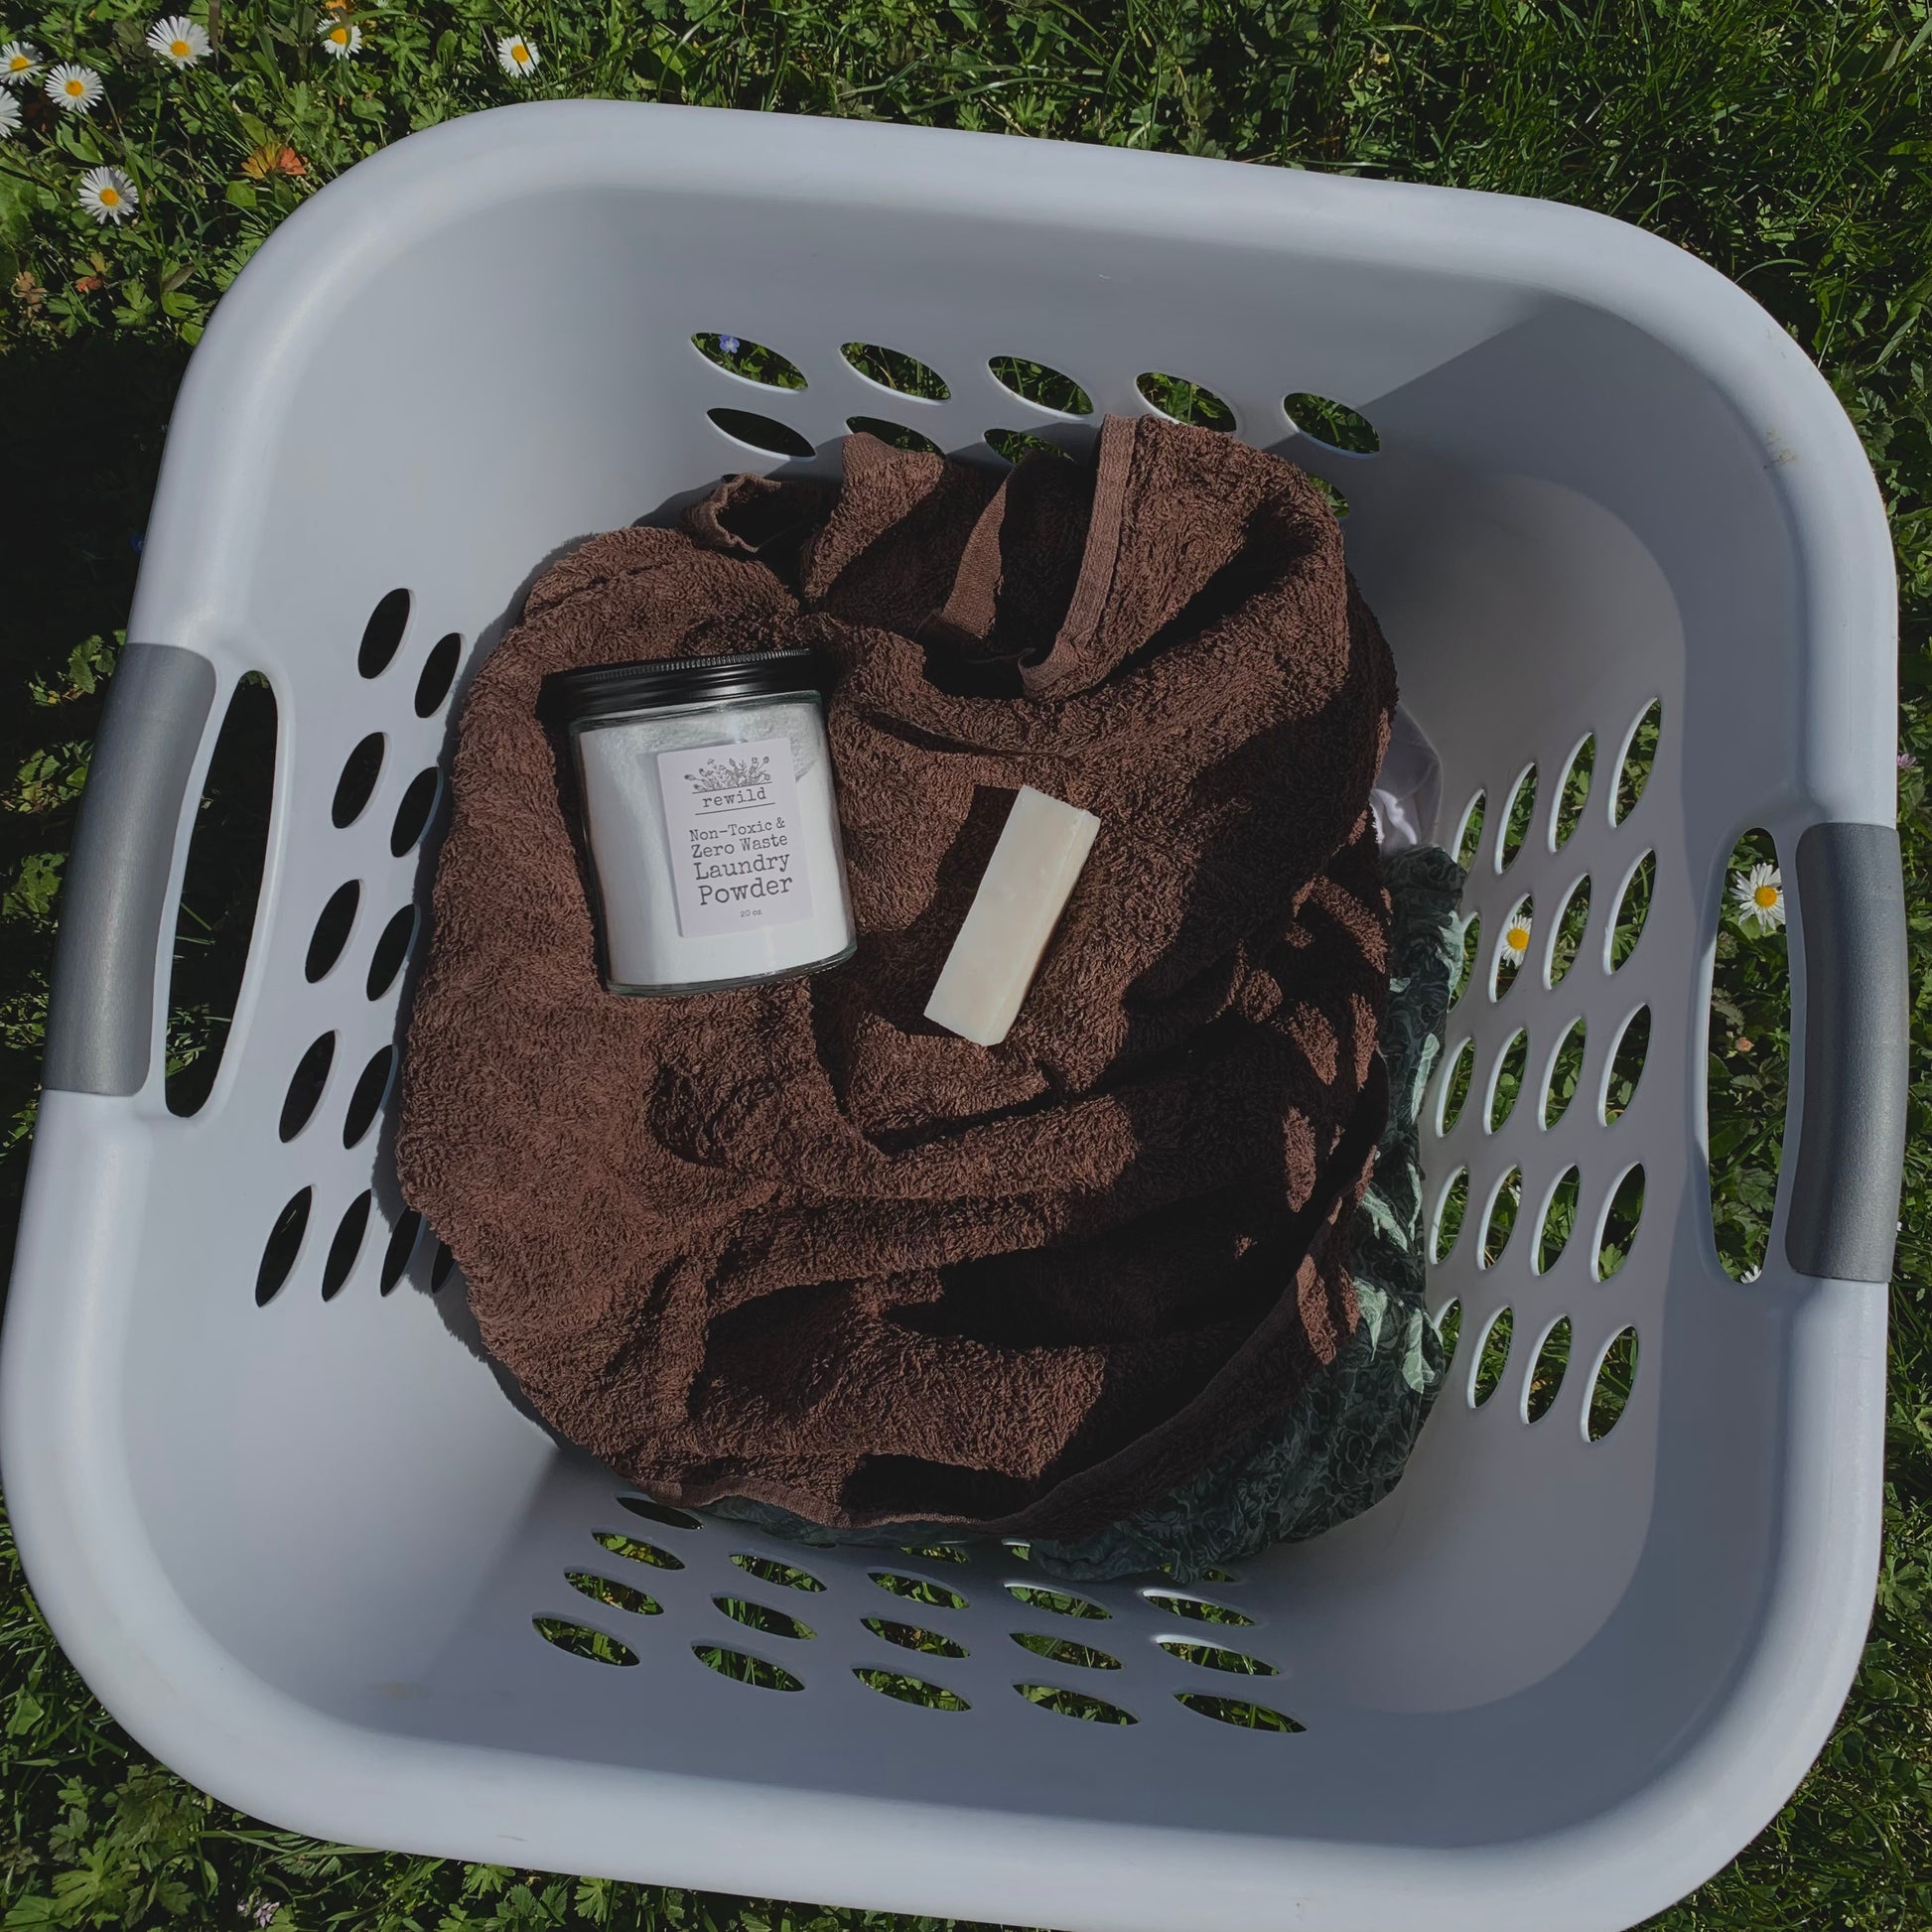 a glass jar of laundry powder and a stain stick on a brown towel in a white laundry basket